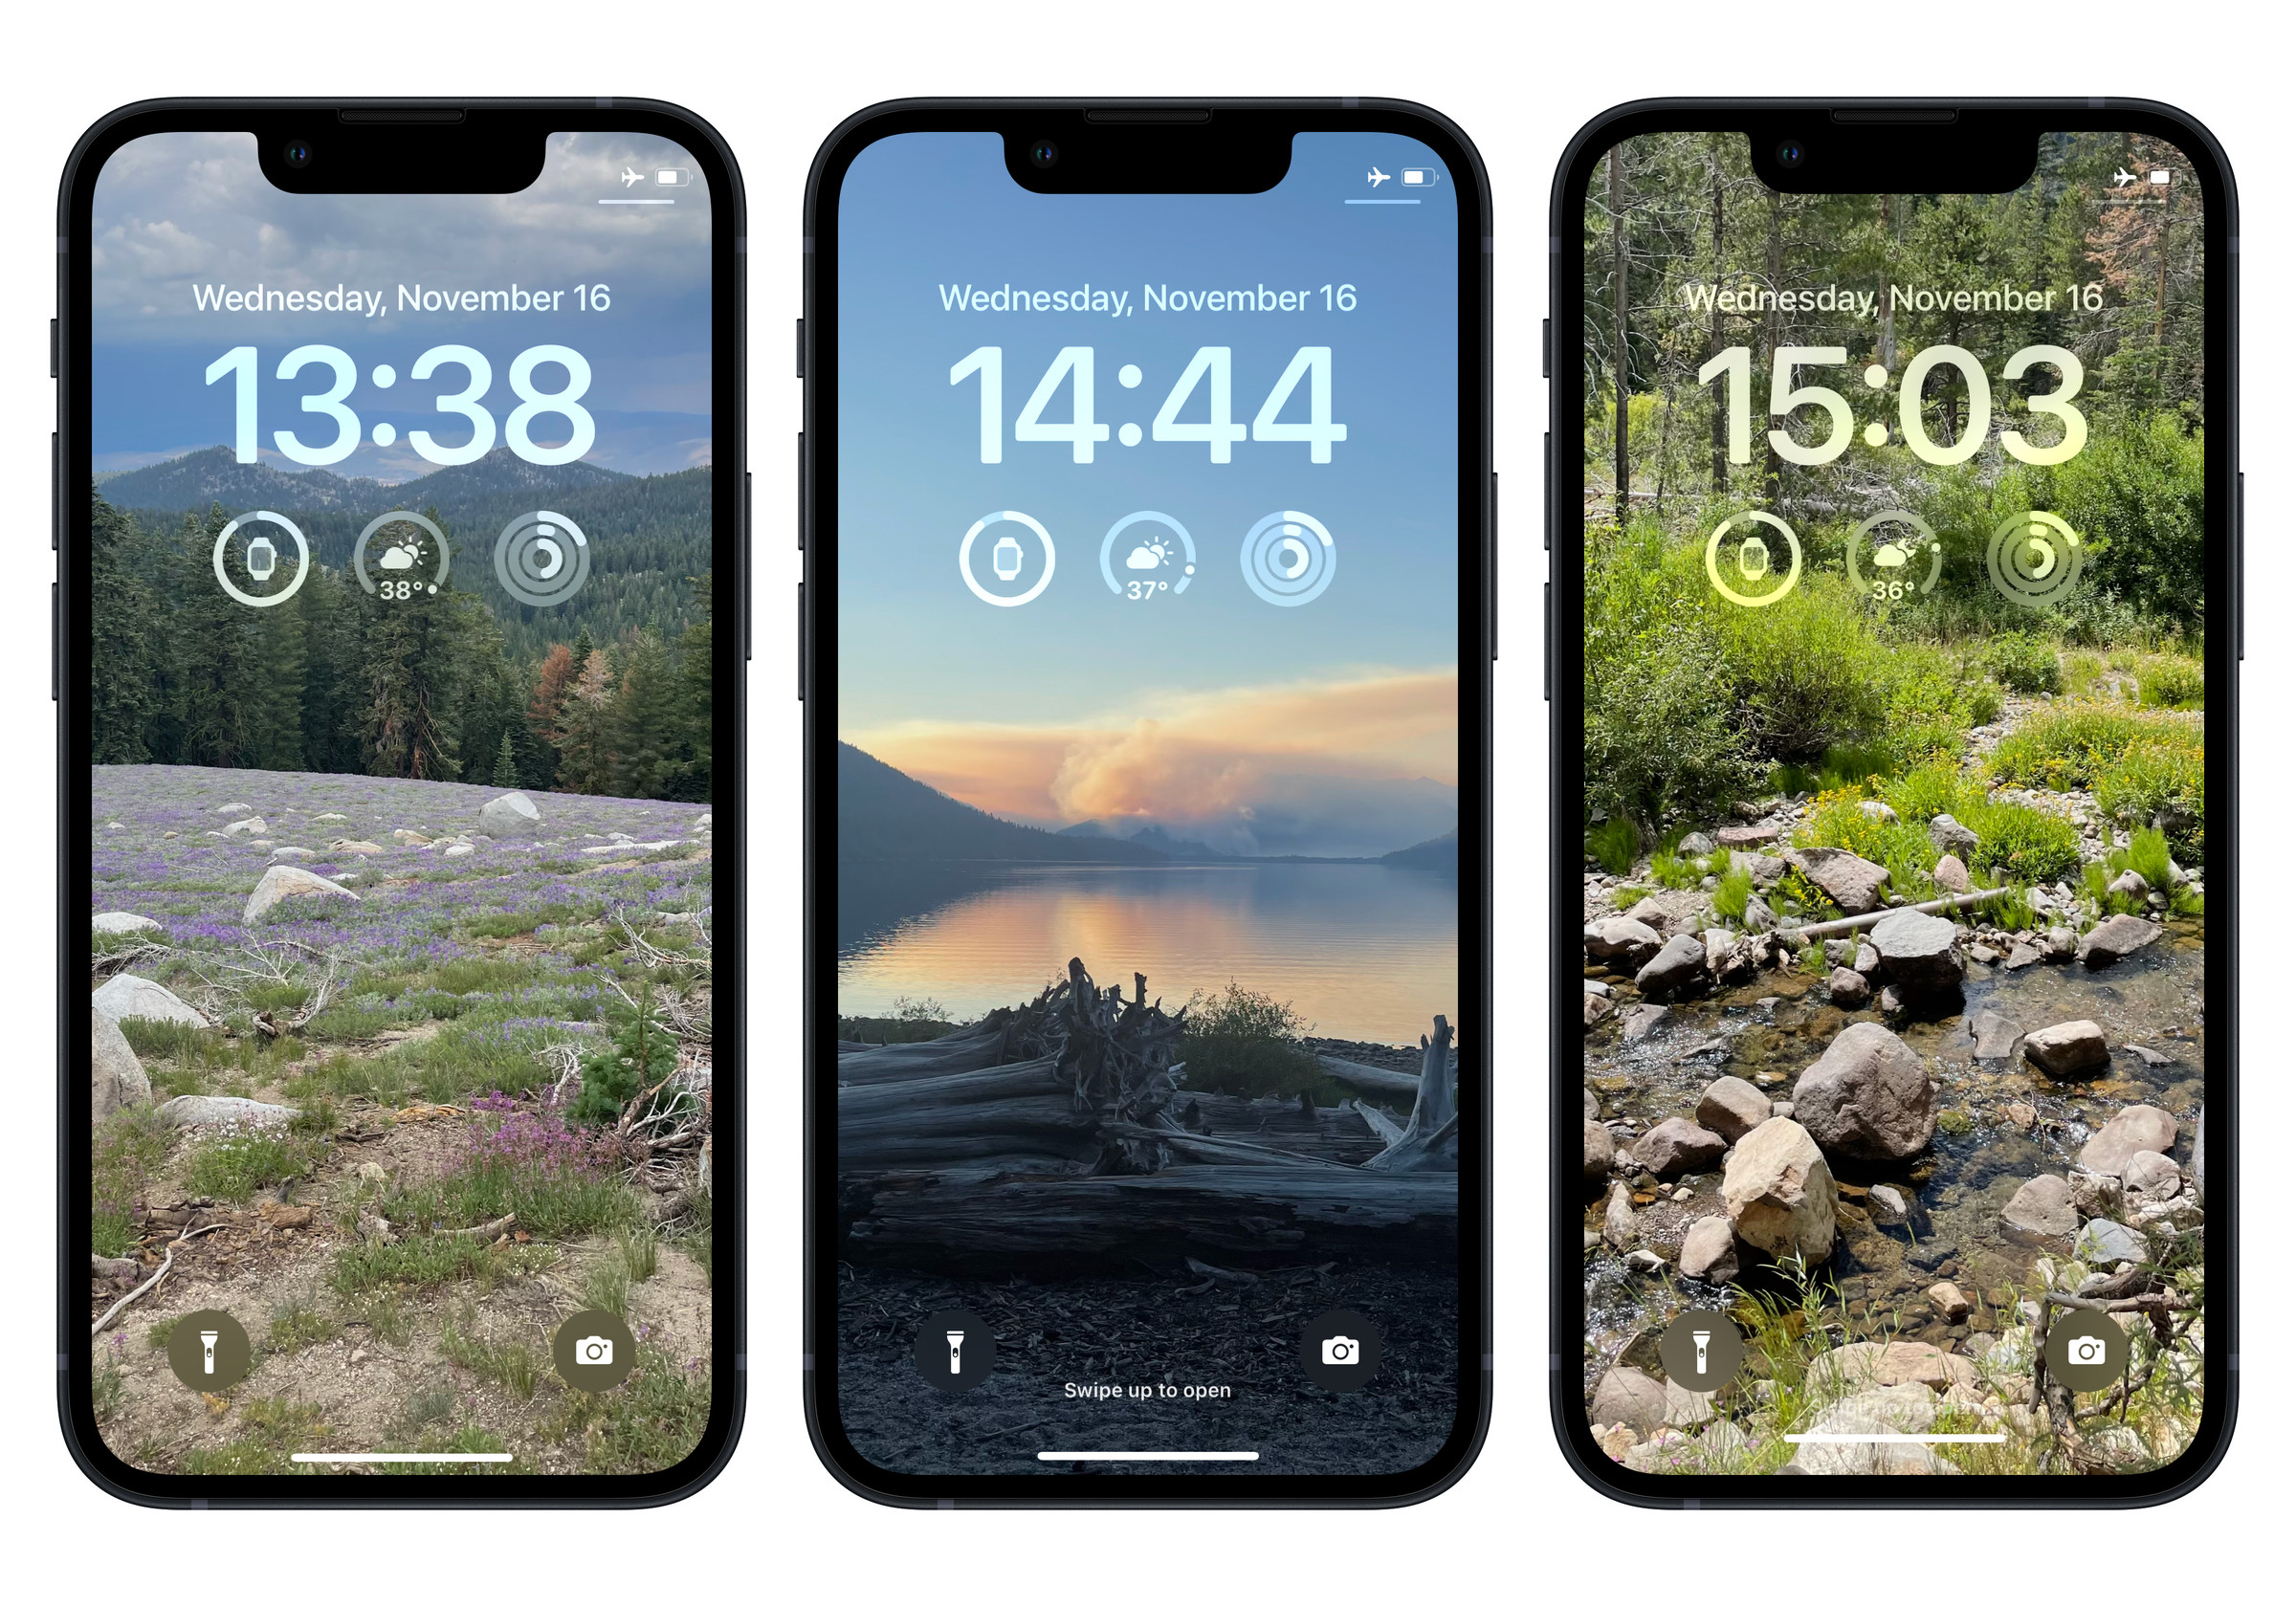 Screenshots of three iPhone lock screens, one showing a mountain field, one showing a lake, and one showing a stream.